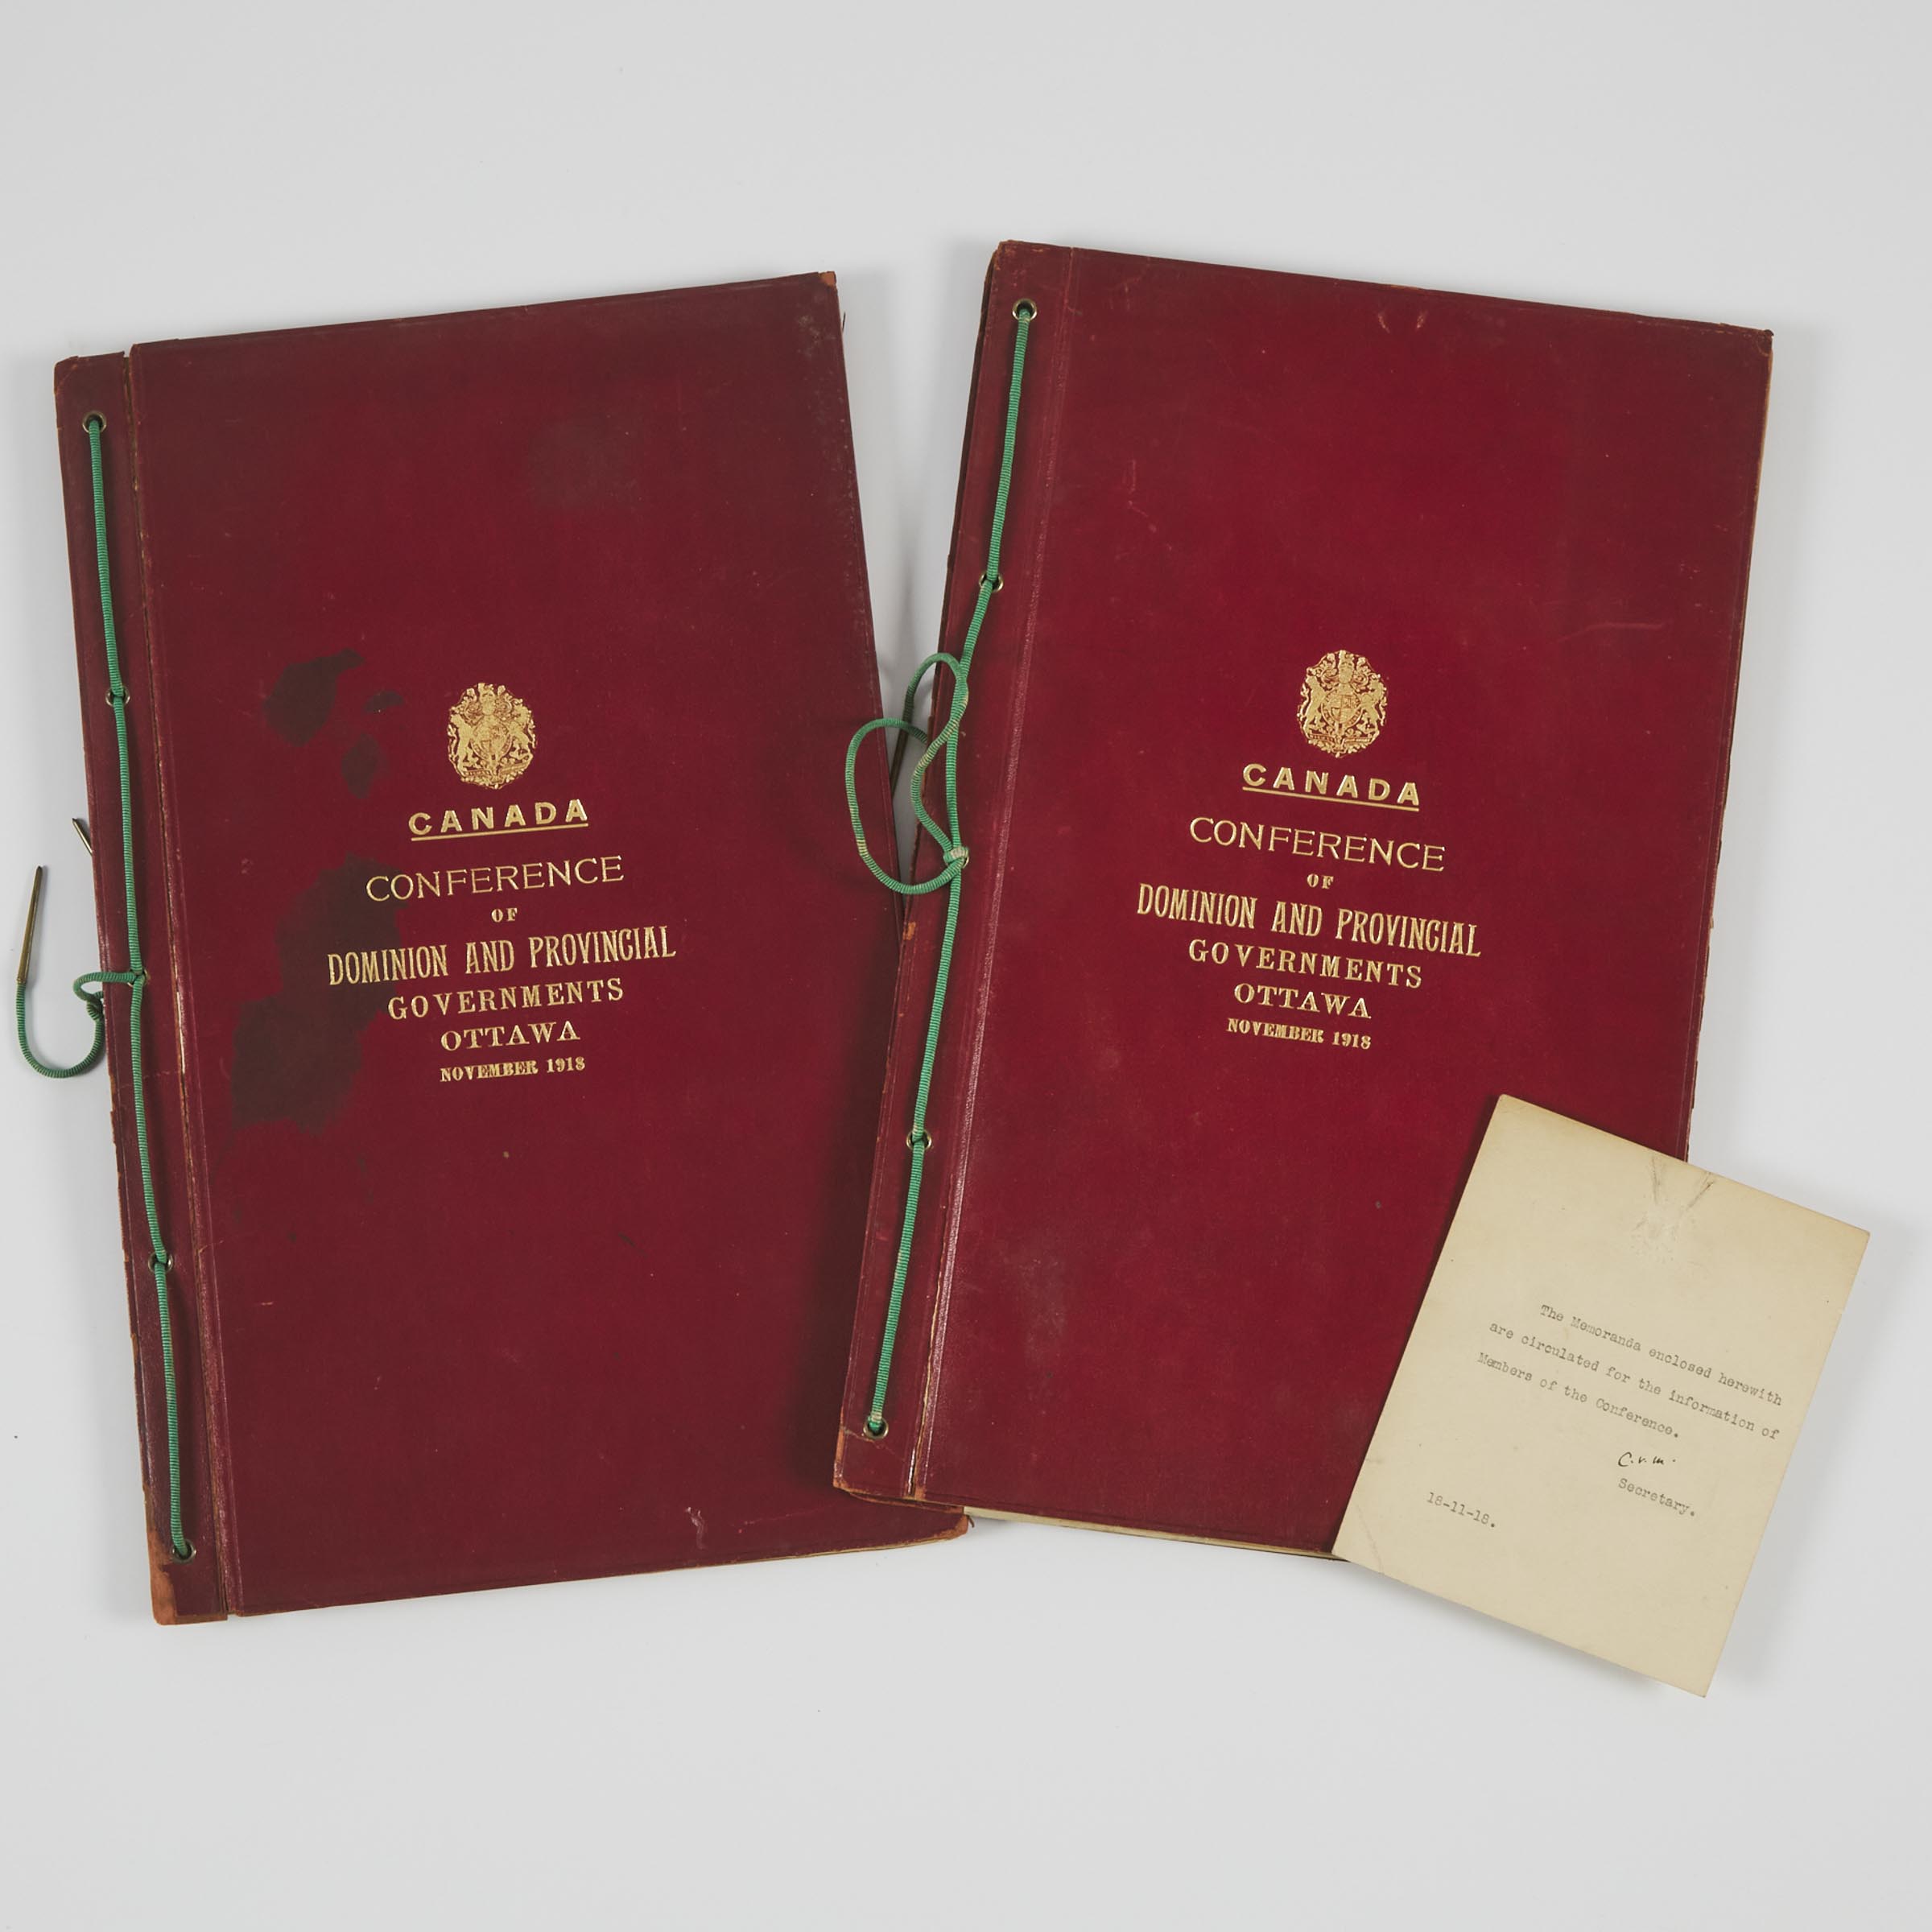  Two Volumes: Canada Conference of Dominion and Provincial Governments, Ottawa, November, 1918